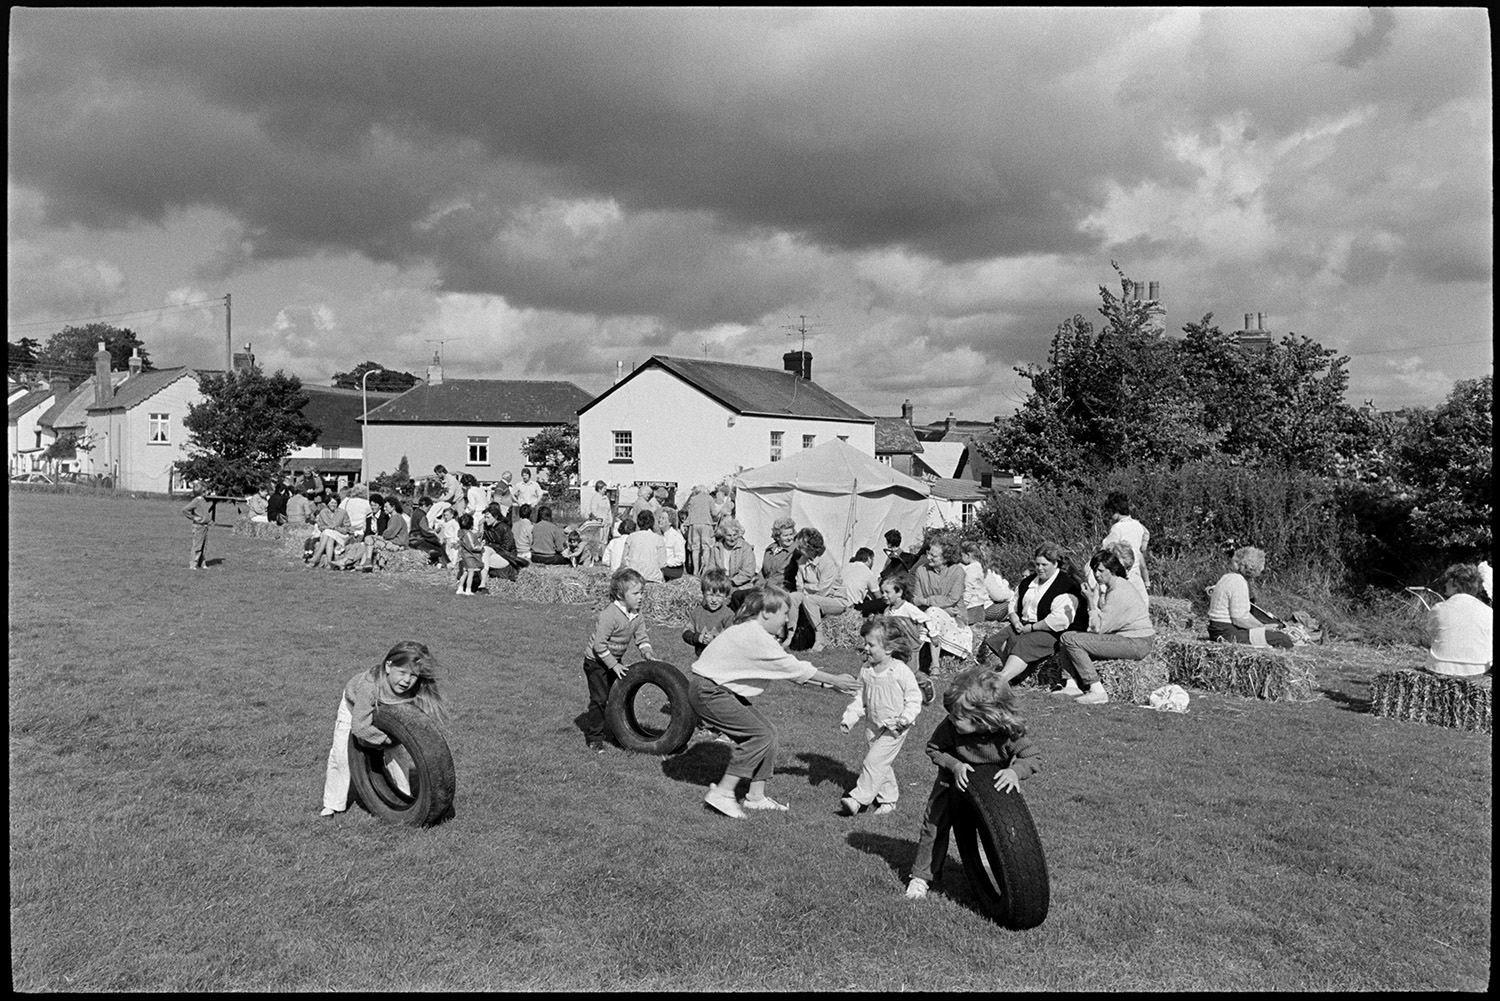 Sports Day, parachute landing races and spectators. 
[Children playing with tyres at Dolton School sports day. Men and woman are sat on hay bales watching and a refreshment tent can be seen in the background.]